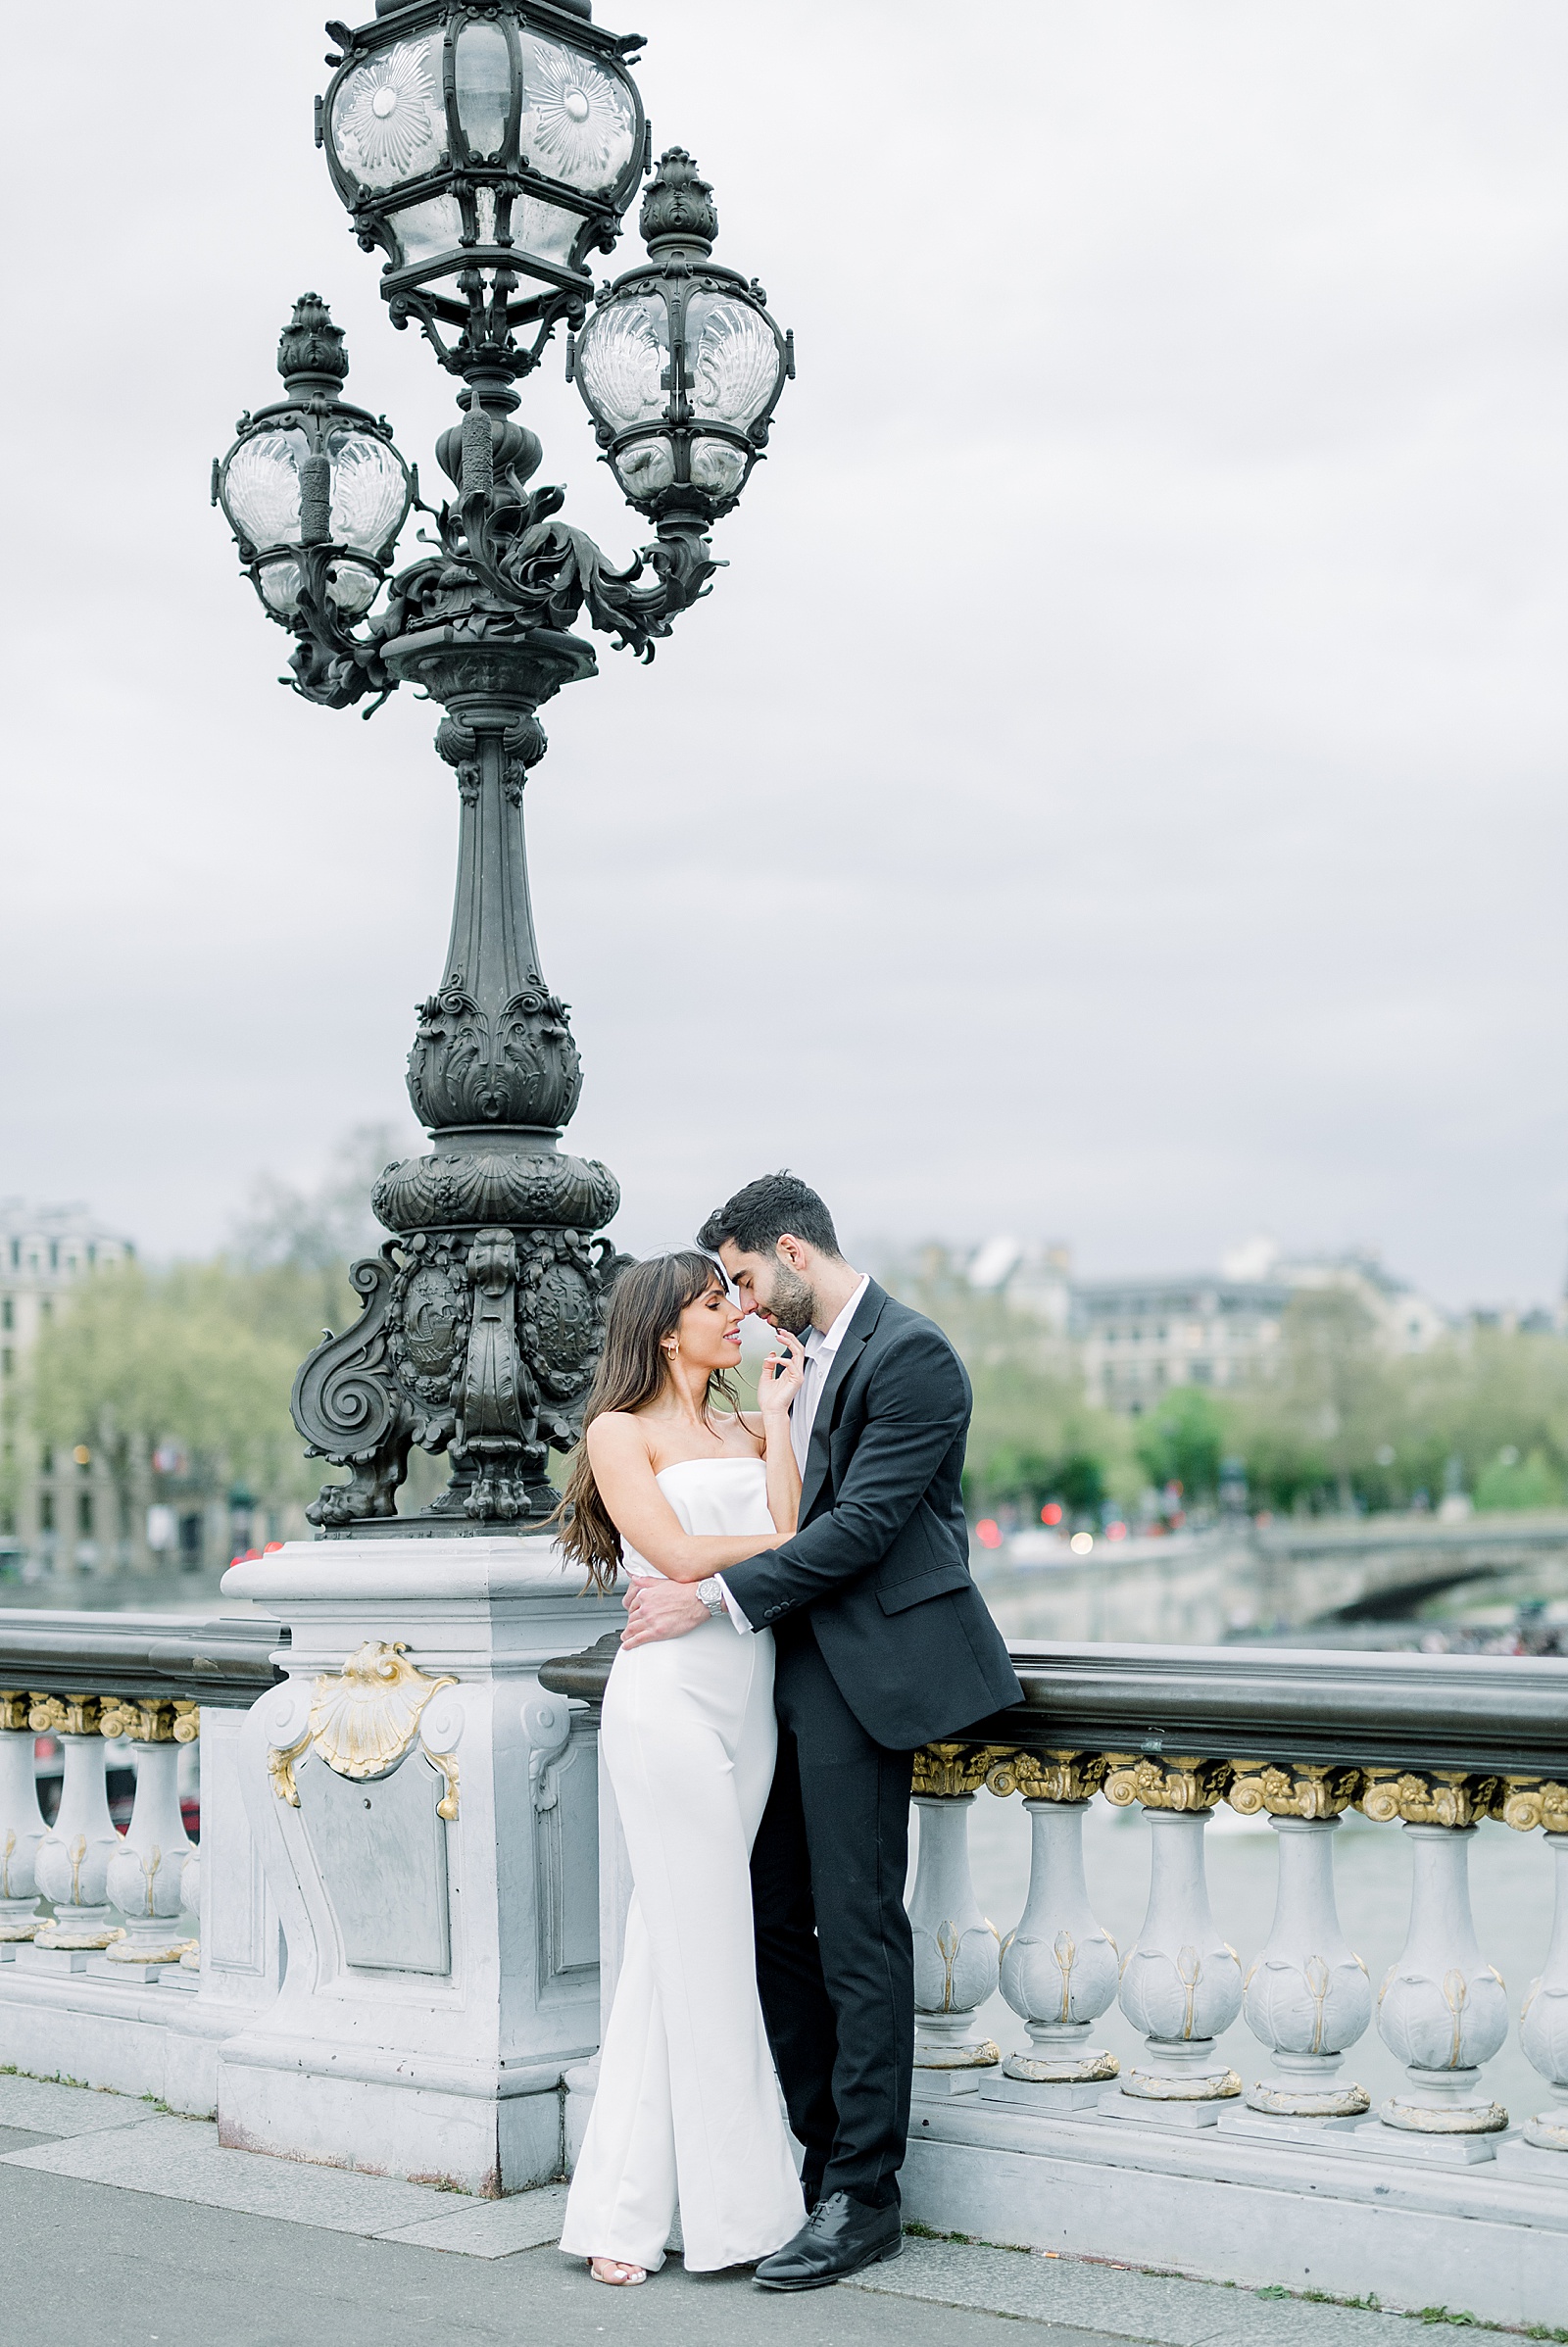 A couple stands by one of the lamp posts on the pont alexandre iii